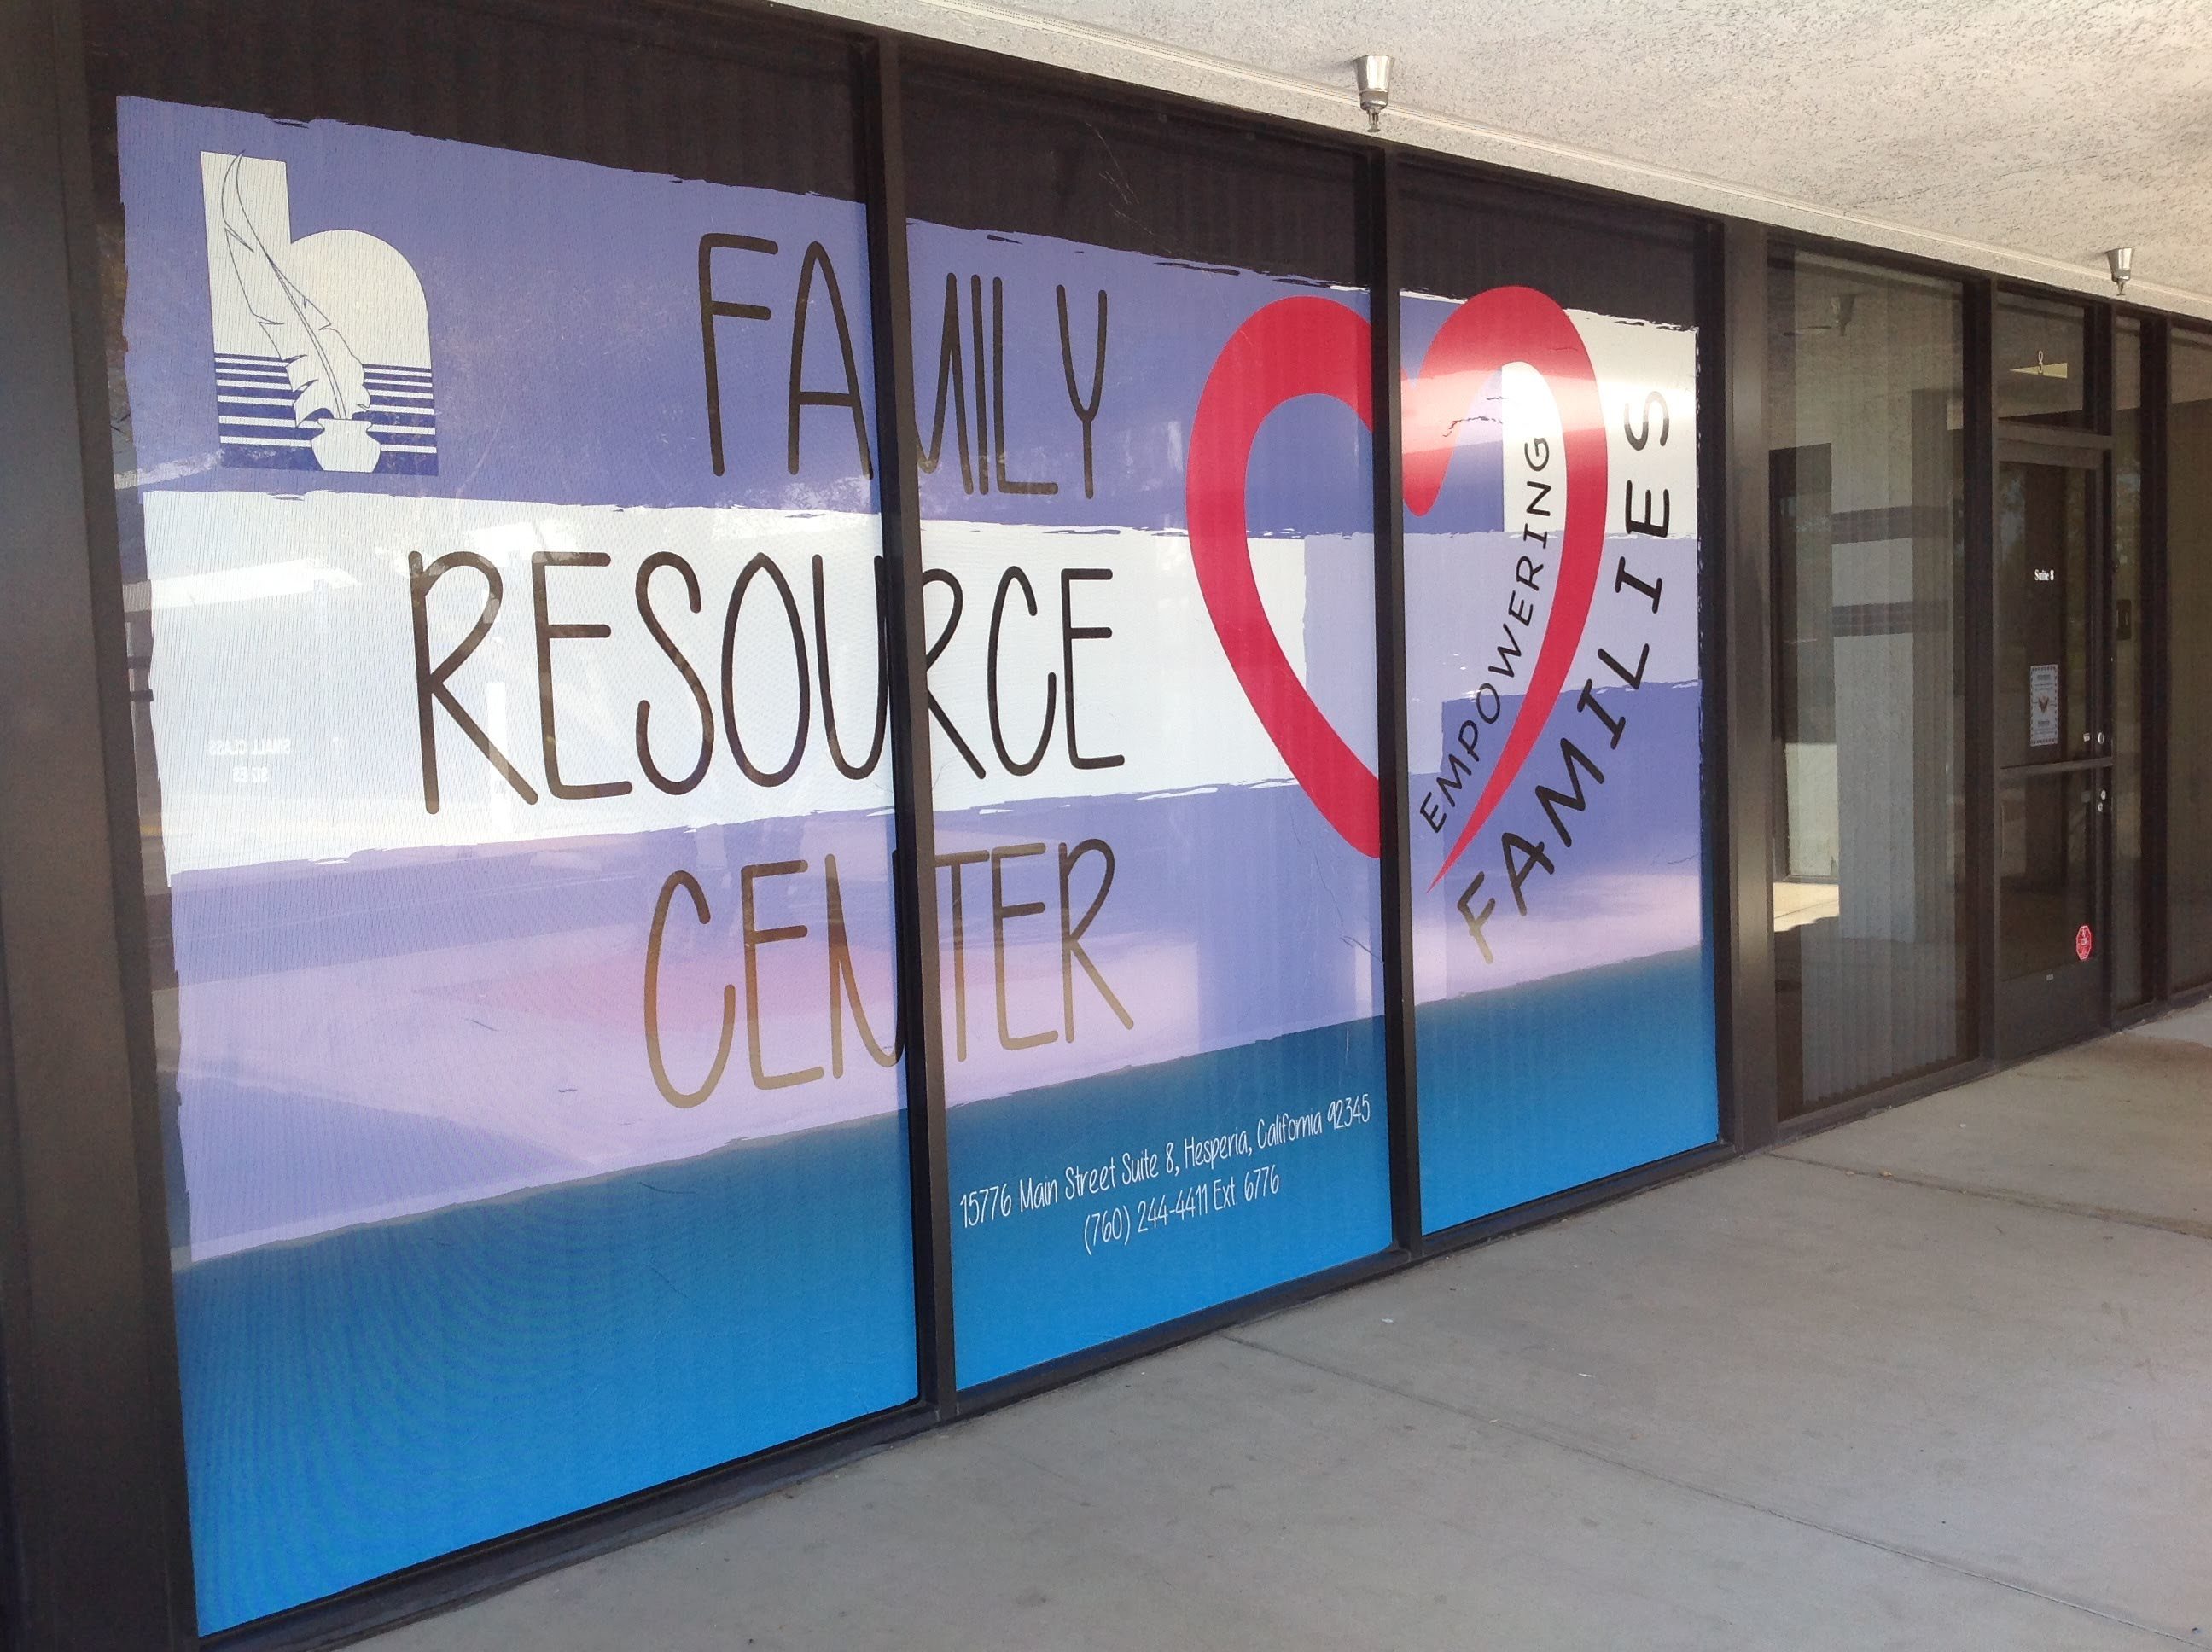 Family Resource Center Office Entrance